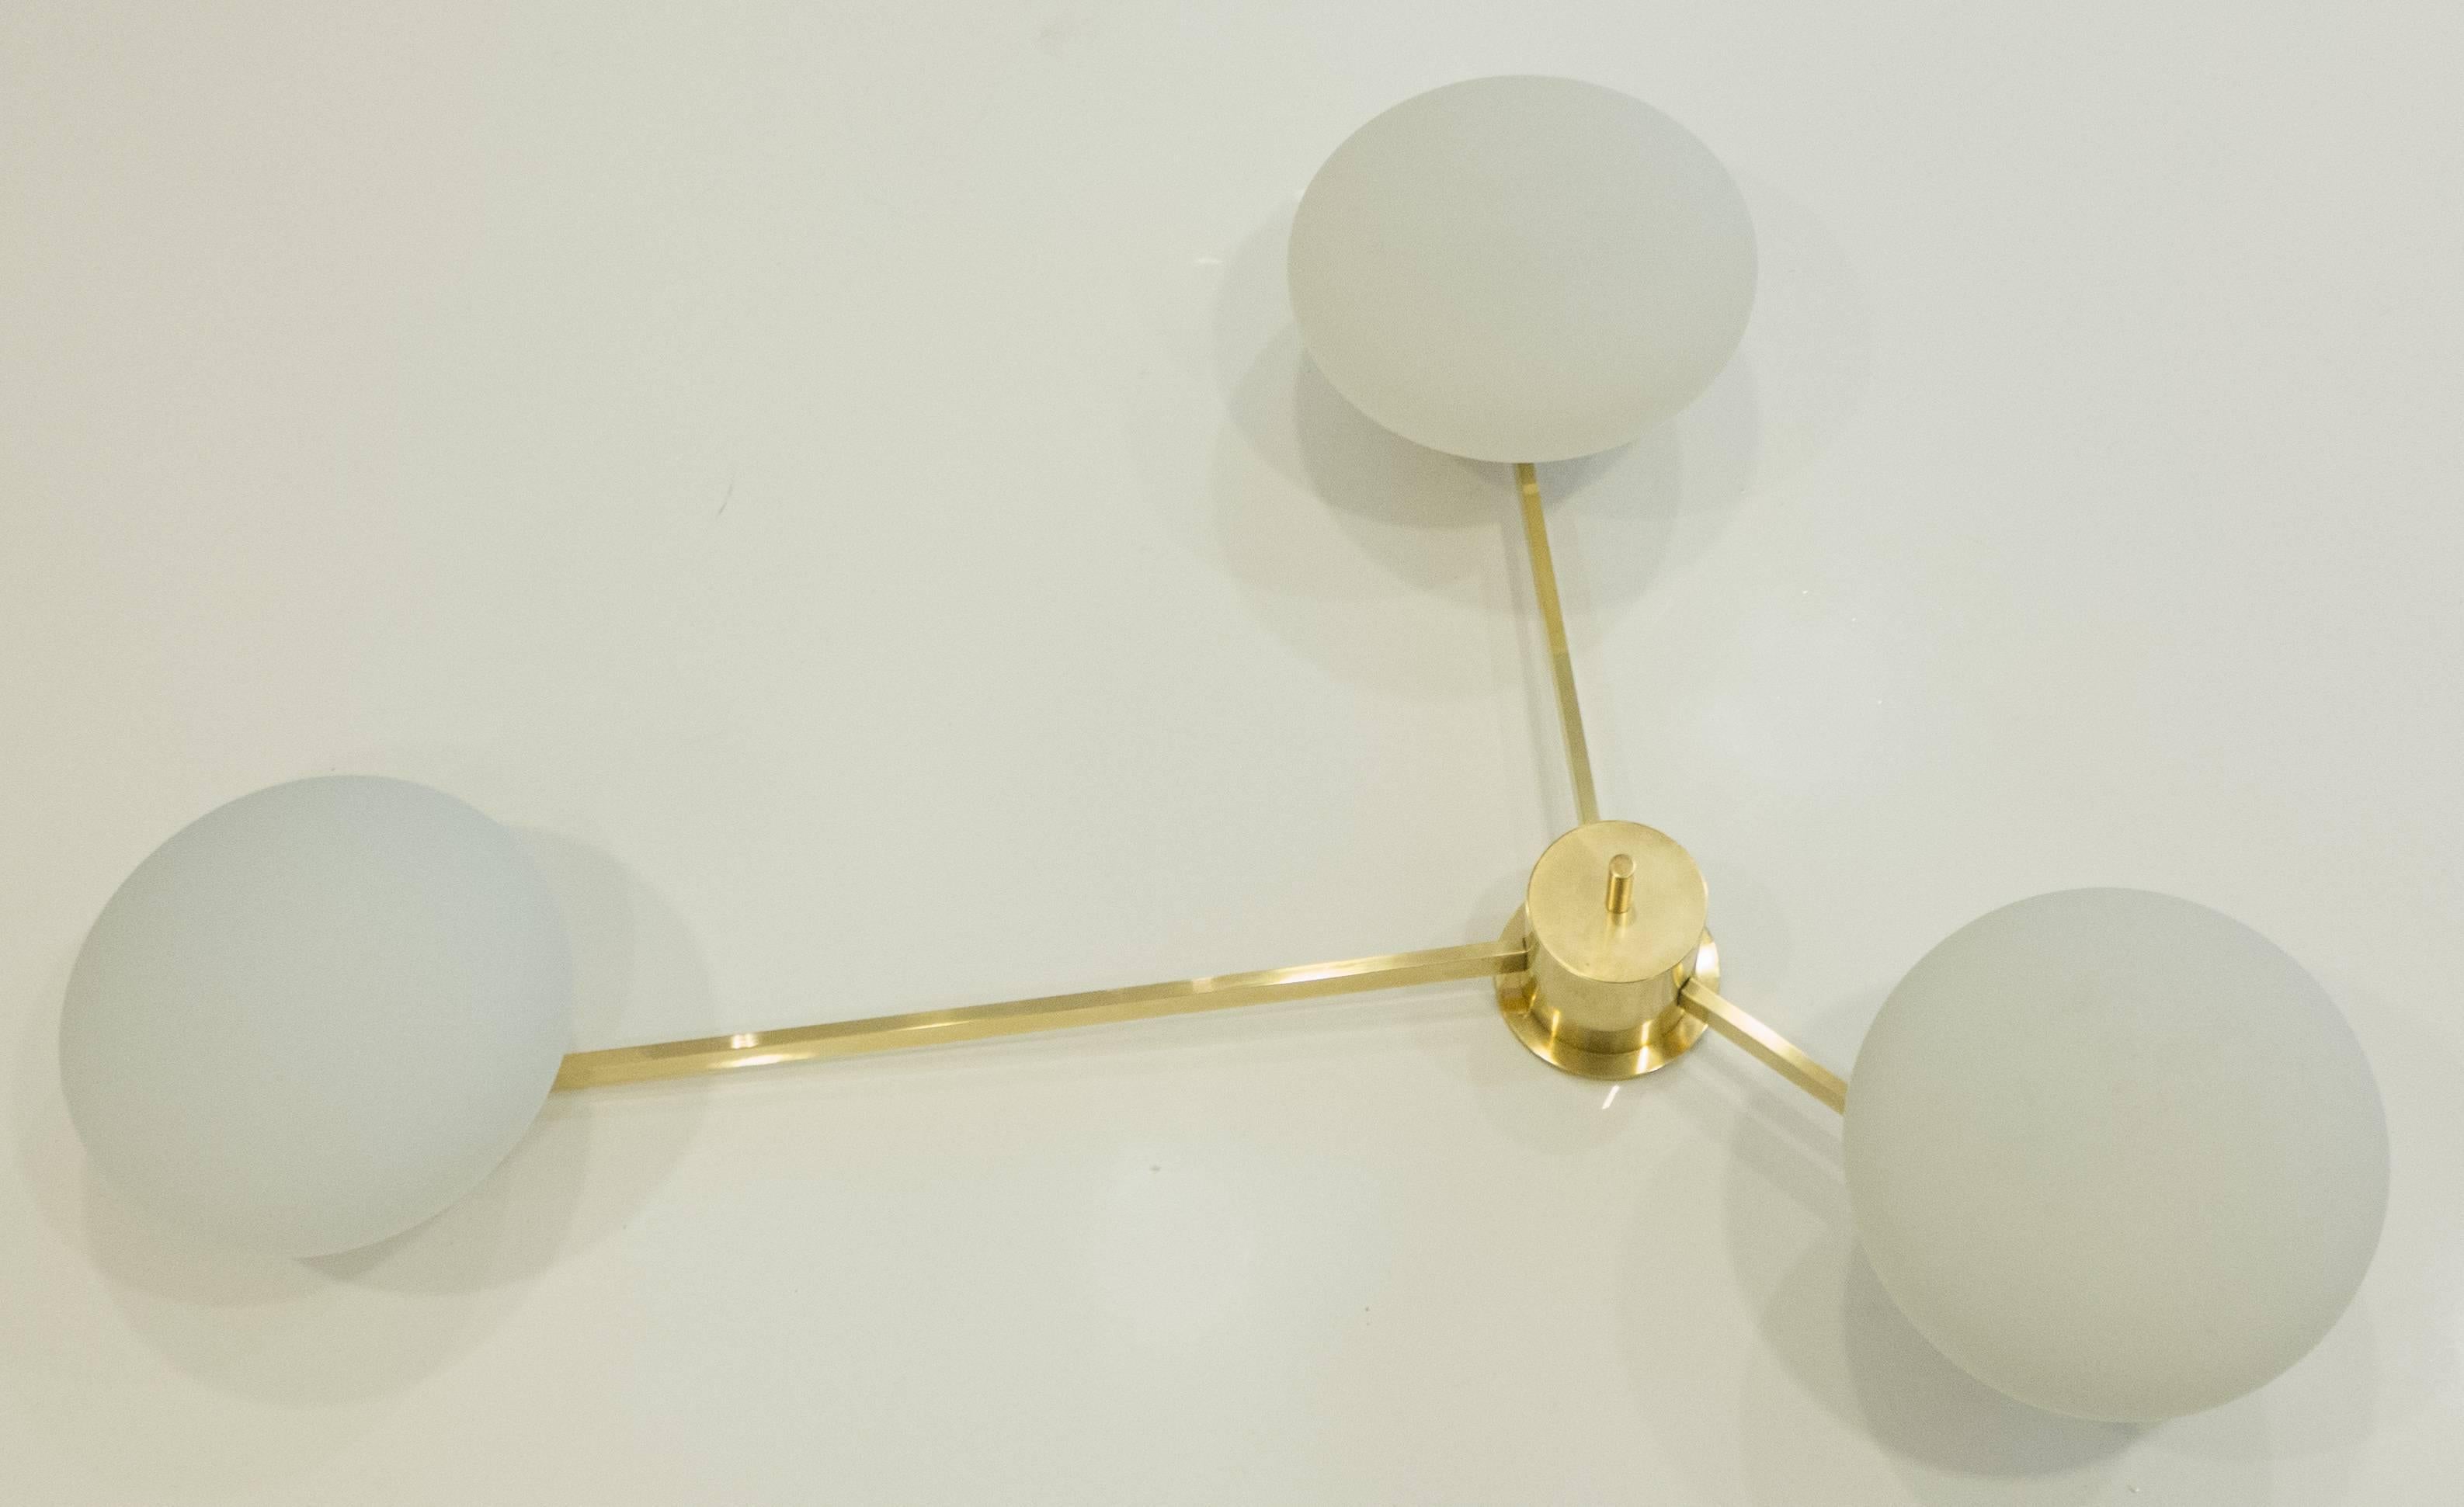 Asymmetrical three-arm ceiling light in brass and chromed metal, with opaline cased glass fixtures. A vintage (circa 1960s) German production attributed to Angelo Lelli for Arredoluce. Stamped Made in Germany on the central column. Flush-mounts to